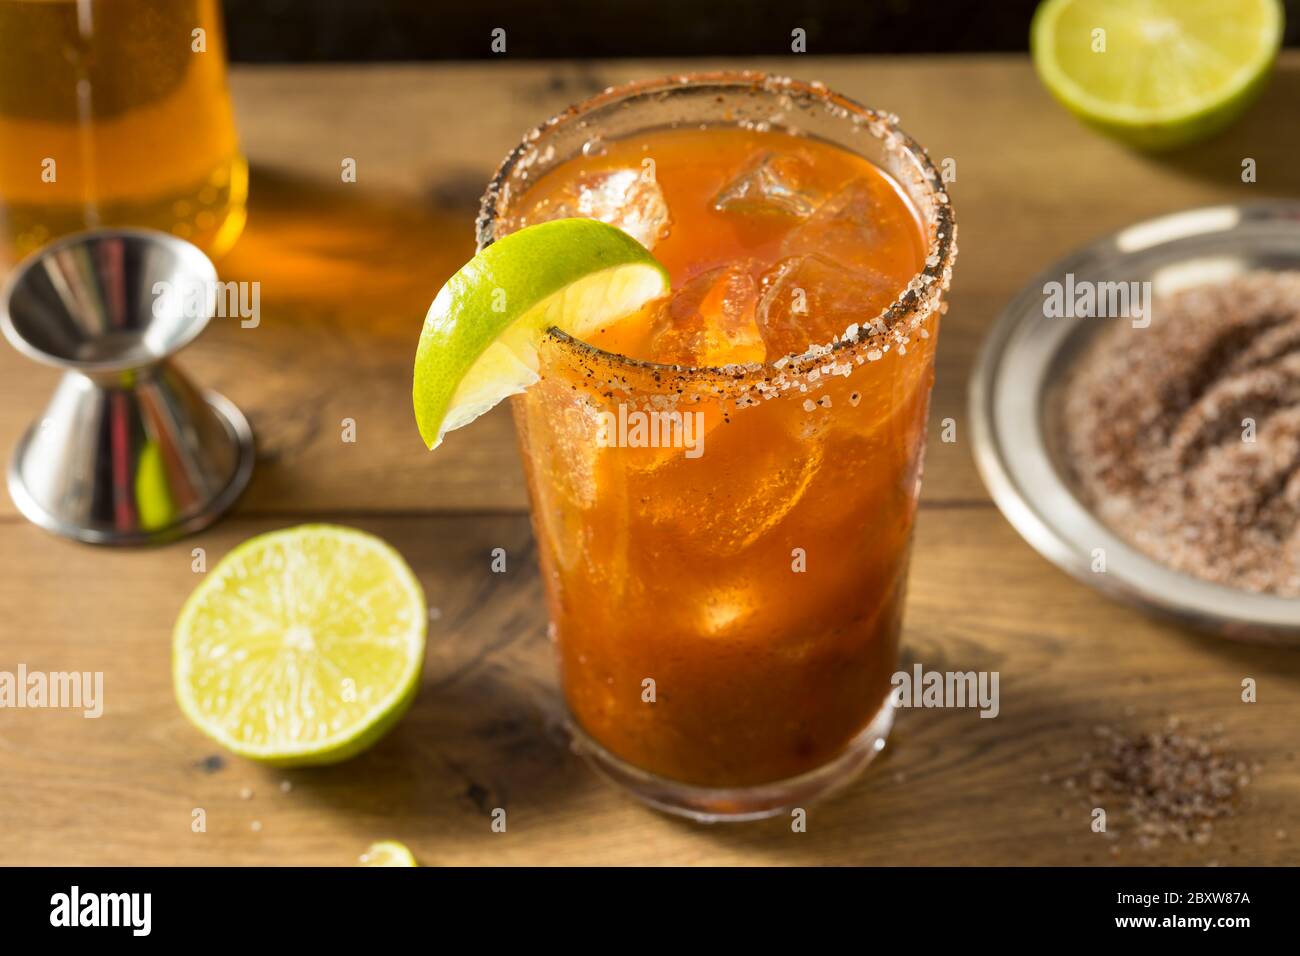 Homemade Mexican Michelada Beer Cocktail with Lime Stock Photo